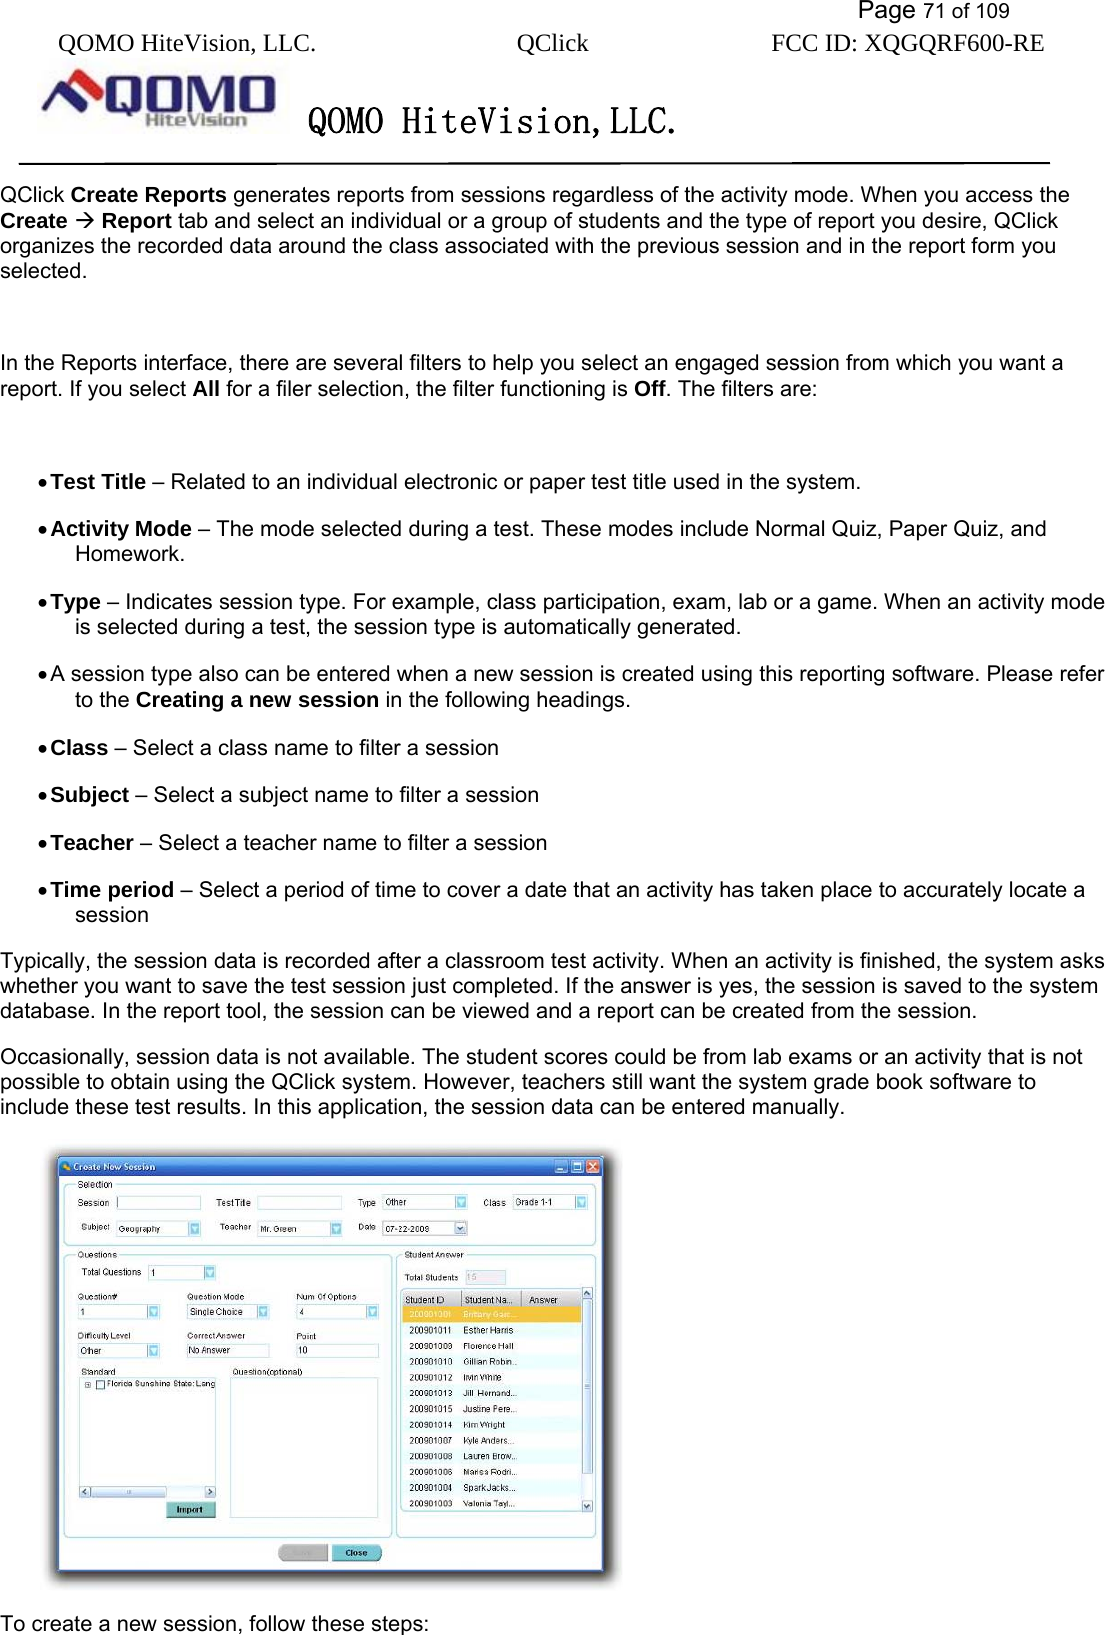           Page 71 of 109 QOMO HiteVision, LLC.  QClick        FCC ID: XQGQRF600-RE     QOMO HiteVision,LLC.   QClick Create Reports generates reports from sessions regardless of the activity mode. When you access the Create  Report tab and select an individual or a group of students and the type of report you desire, QClick organizes the recorded data around the class associated with the previous session and in the report form you selected.  In the Reports interface, there are several filters to help you select an engaged session from which you want a report. If you select All for a filer selection, the filter functioning is Off. The filters are:    • Test Title – Related to an individual electronic or paper test title used in the system.   • Activity Mode – The mode selected during a test. These modes include Normal Quiz, Paper Quiz, and Homework. • Type – Indicates session type. For example, class participation, exam, lab or a game. When an activity mode is selected during a test, the session type is automatically generated.   • A session type also can be entered when a new session is created using this reporting software. Please refer to the Creating a new session in the following headings. • Class – Select a class name to filter a session • Subject – Select a subject name to filter a session • Teacher – Select a teacher name to filter a session • Time period – Select a period of time to cover a date that an activity has taken place to accurately locate a session Typically, the session data is recorded after a classroom test activity. When an activity is finished, the system asks whether you want to save the test session just completed. If the answer is yes, the session is saved to the system database. In the report tool, the session can be viewed and a report can be created from the session.   Occasionally, session data is not available. The student scores could be from lab exams or an activity that is not possible to obtain using the QClick system. However, teachers still want the system grade book software to include these test results. In this application, the session data can be entered manually.    To create a new session, follow these steps: 